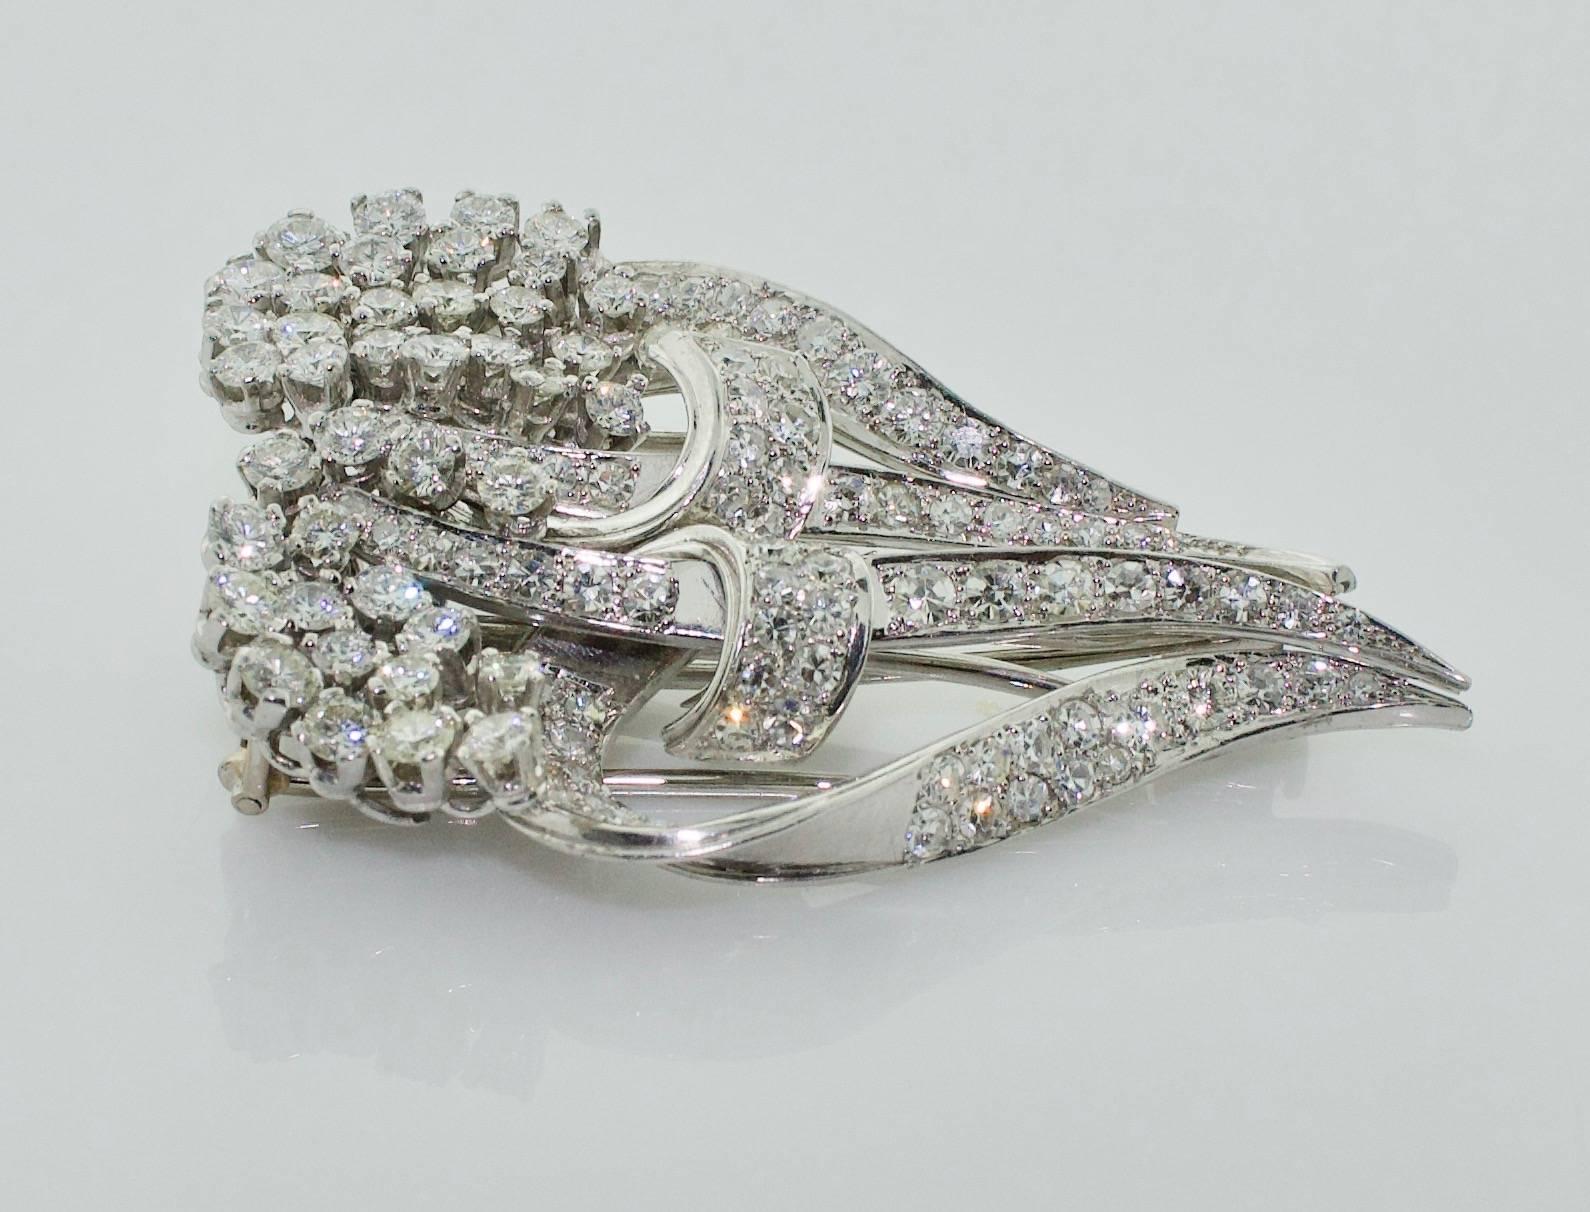 Versatile 1940s Diamond Brooch Clips 6.30 Carats  In Excellent Condition For Sale In Wailea, HI